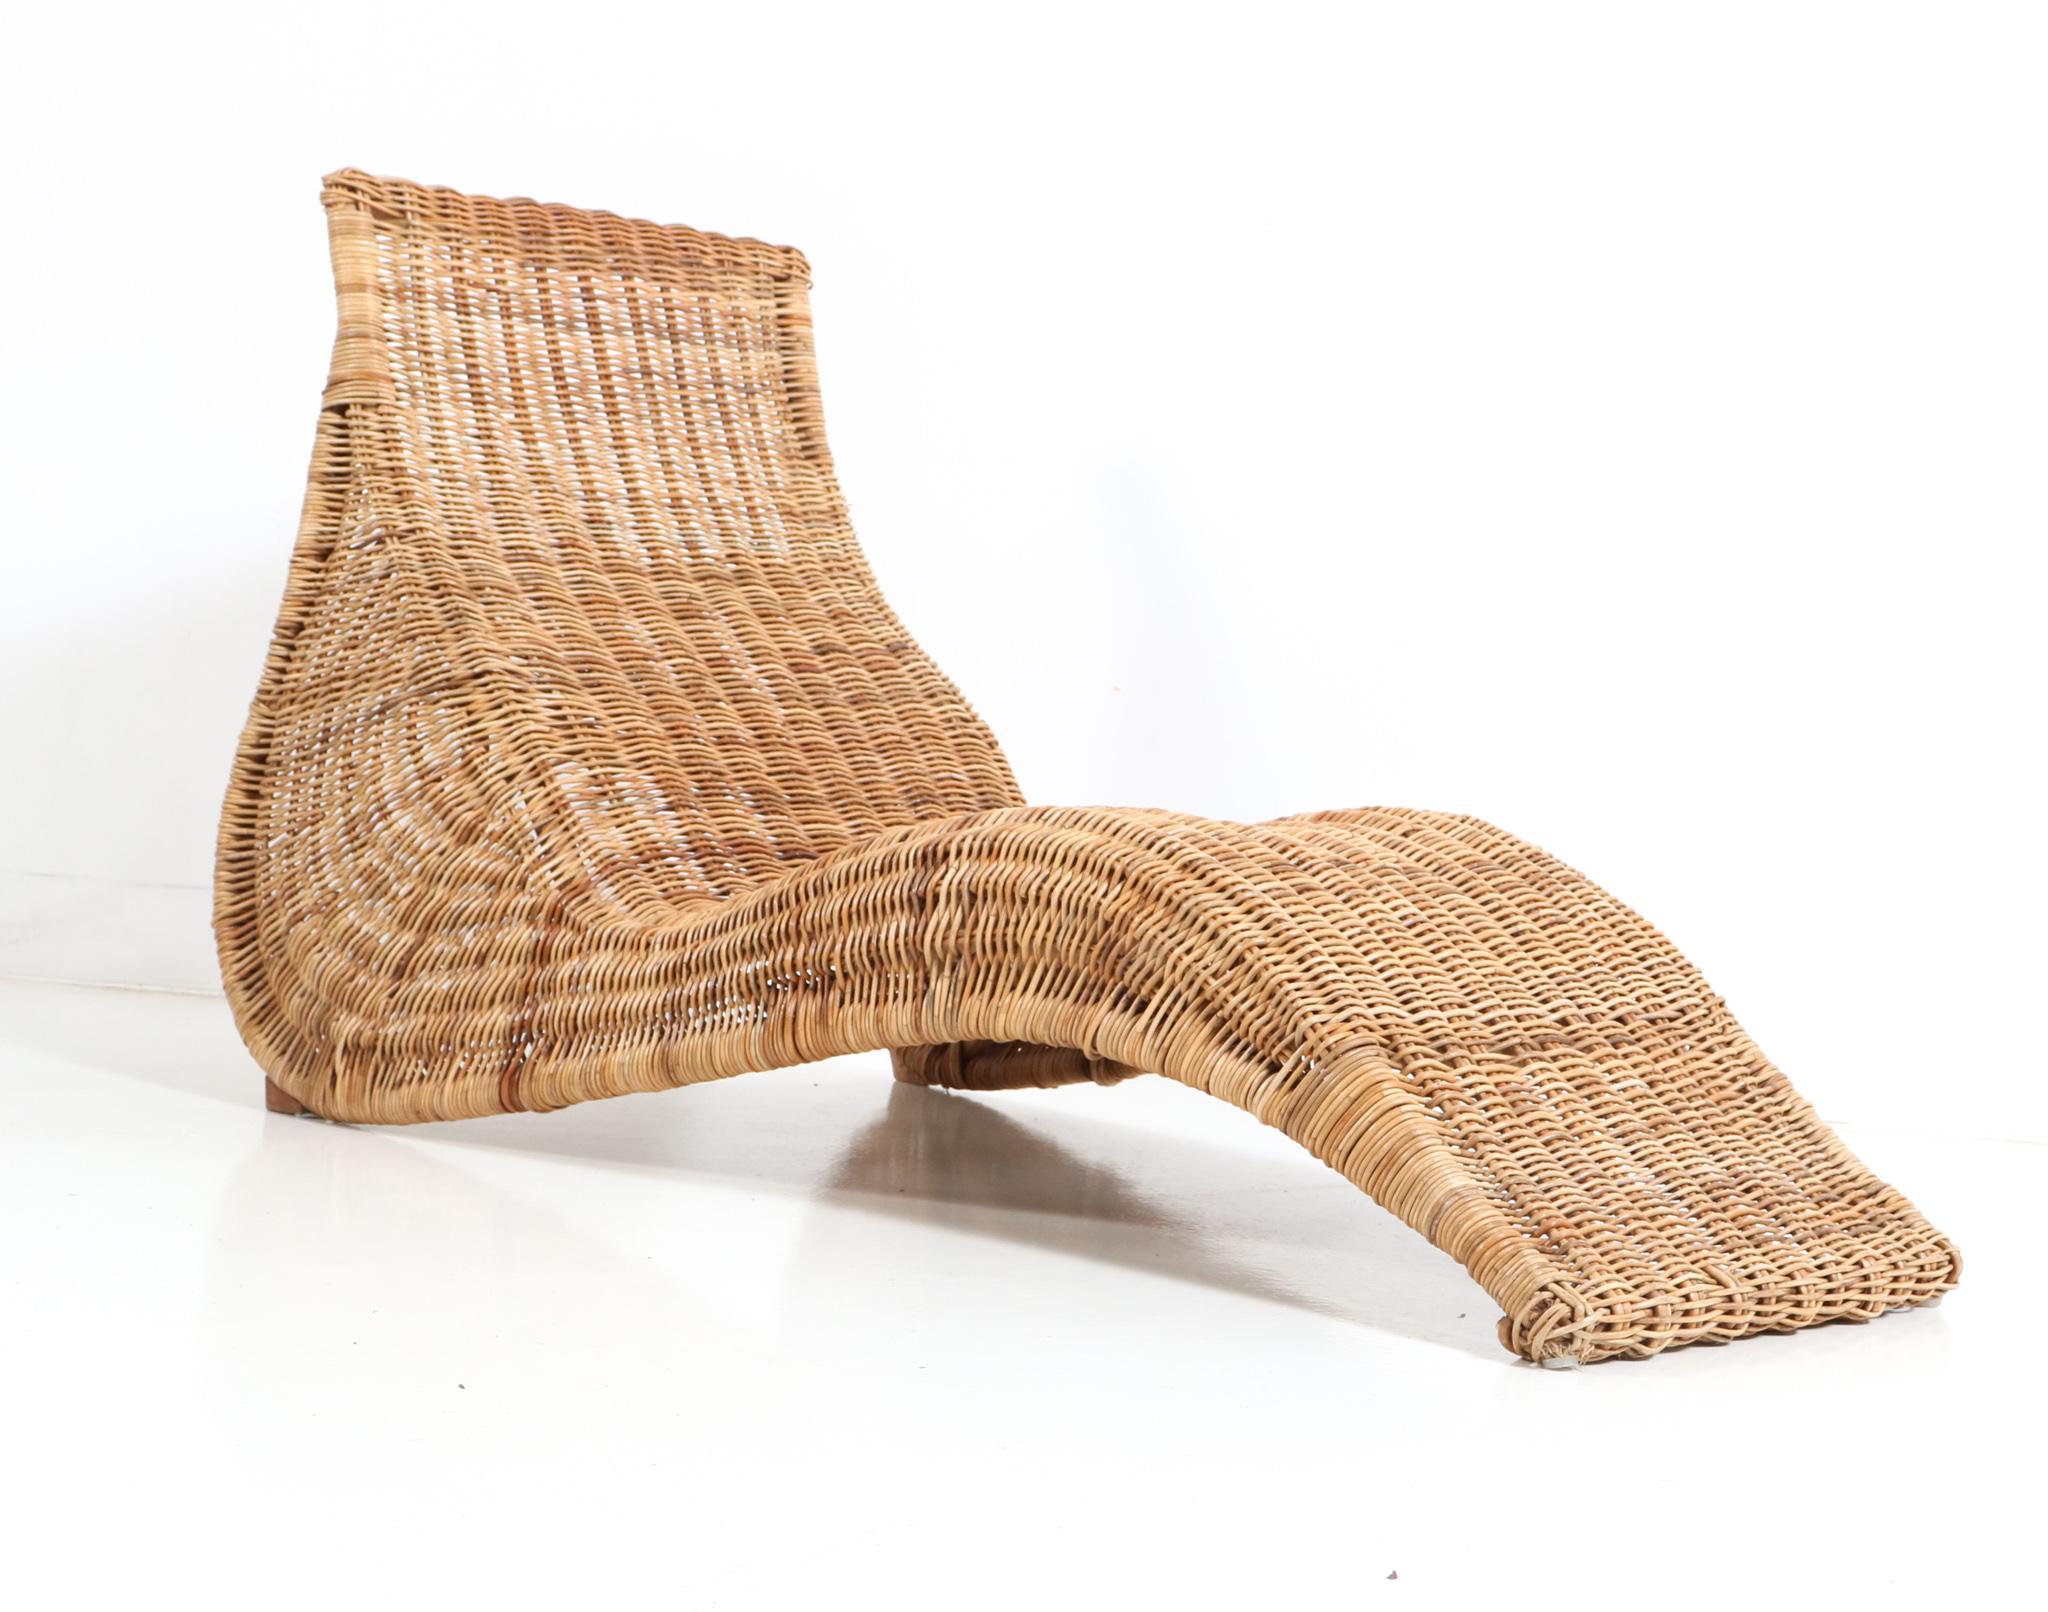 Stunning Mid-Century Modern style chaise longue or lounge chair.
Design by Carl Öjerstam for Ikea.
Striking Swedish design from the 1990s.
Executed in wicker and rattan, an idyllic place to relax and perfect for reading a book in peace fully